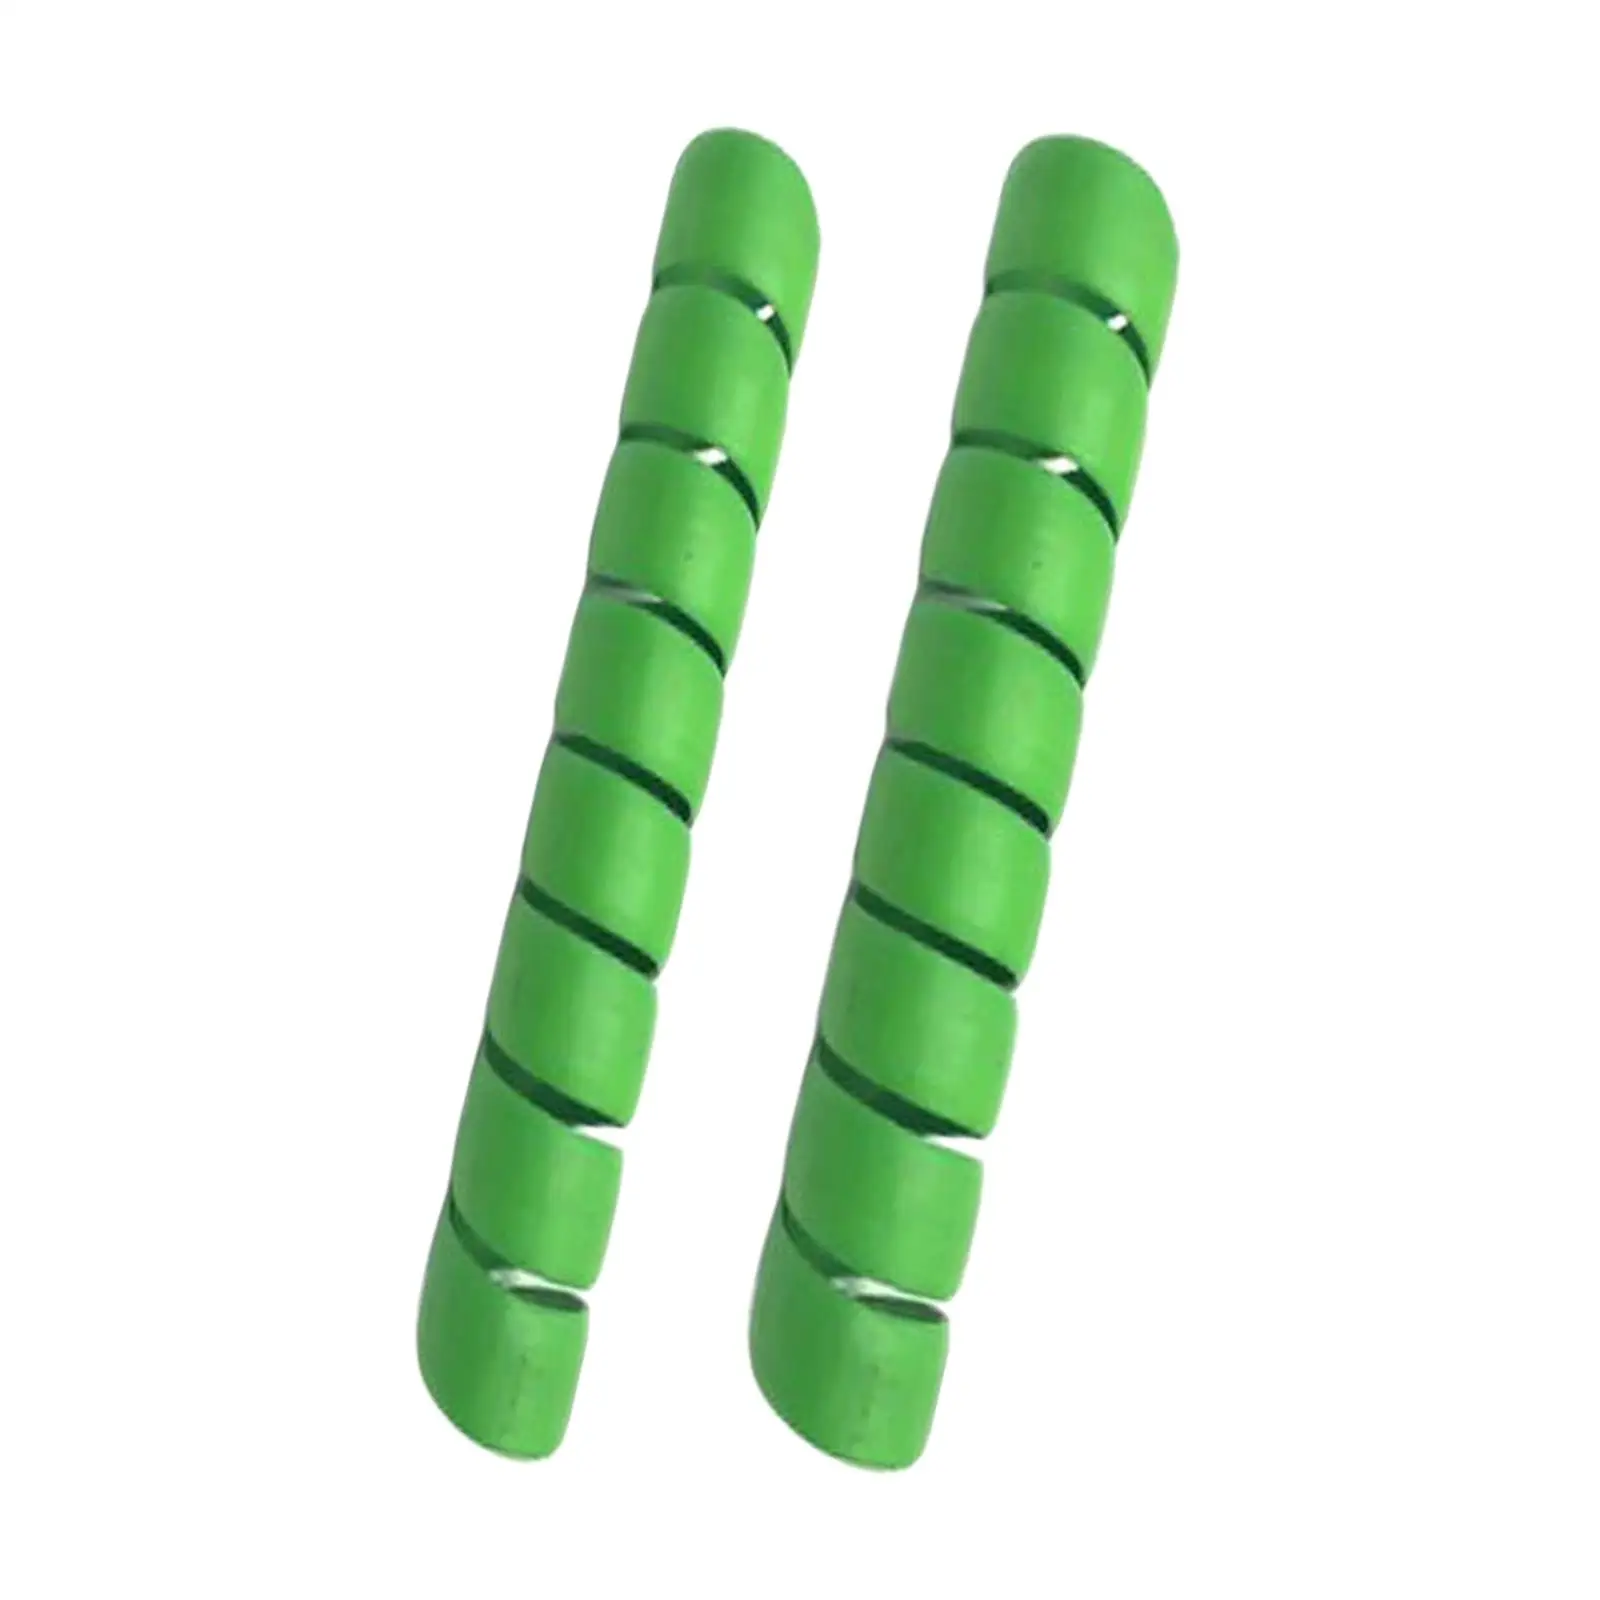 2x Tree Trunk Protector Portable Plants Guard Durable Sleeve Prevent Damage Flexible Protective Sapling Protector Green